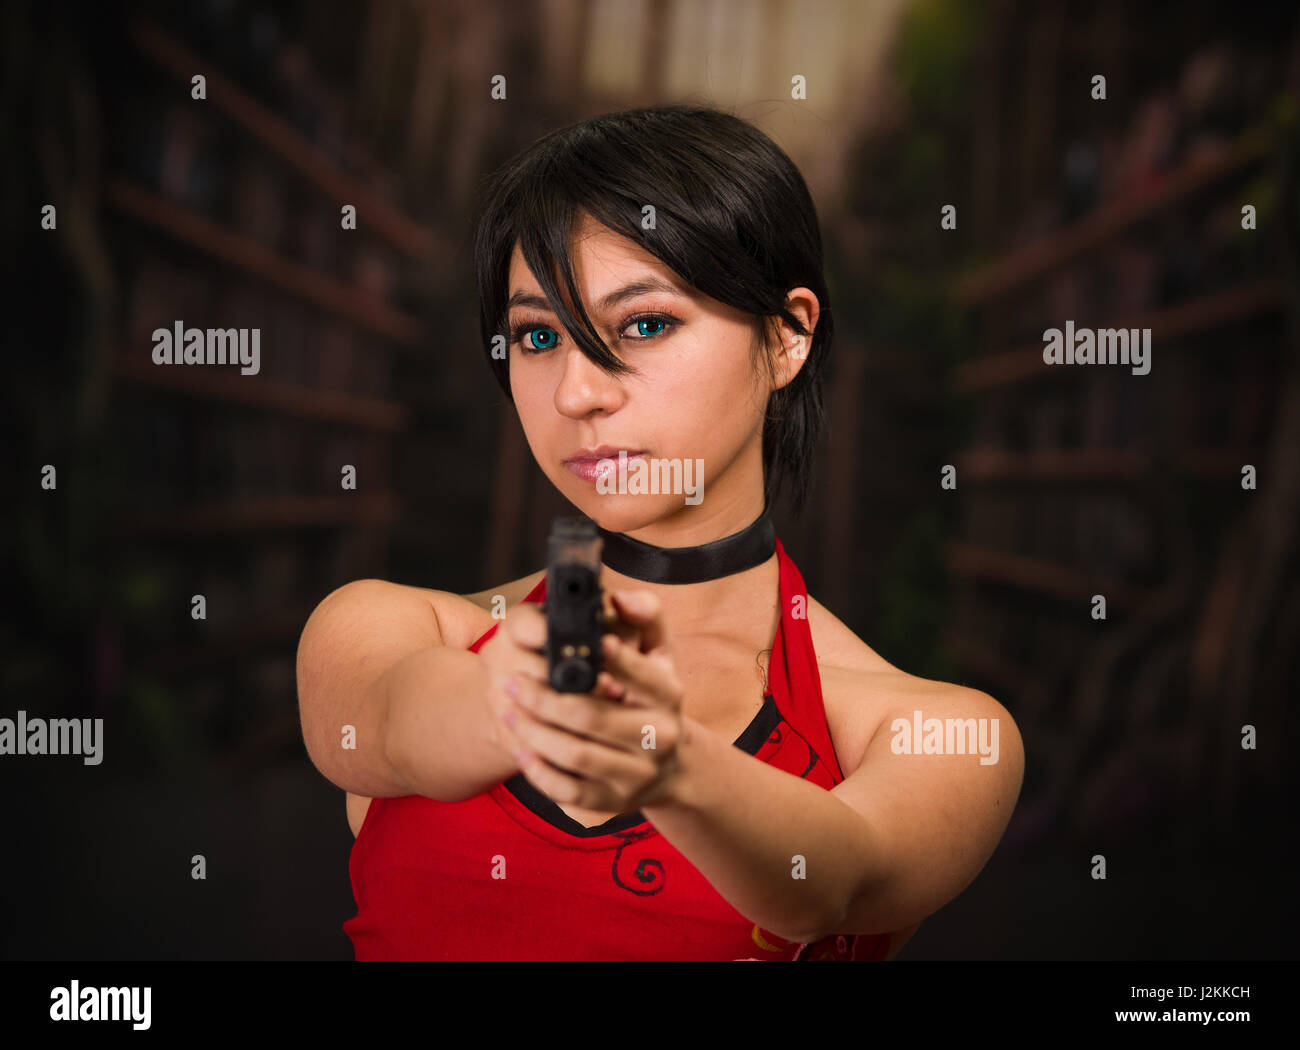 Dangerous powerful Woman Holding a Gun, resident evil cosplay costume Stock Photo